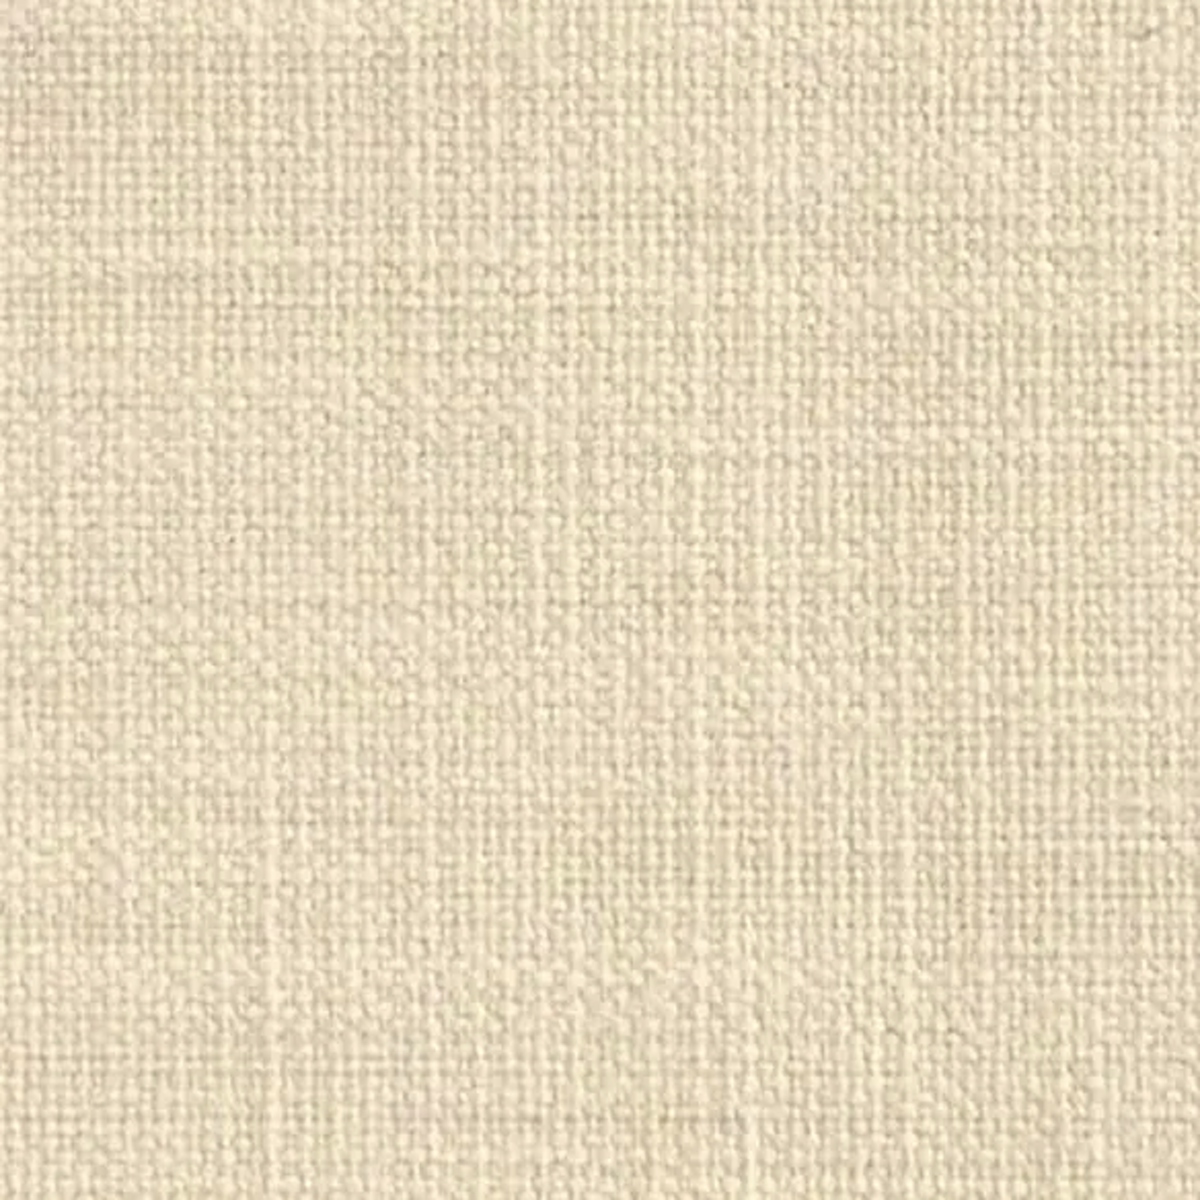 Cotton upholstery textile swatch